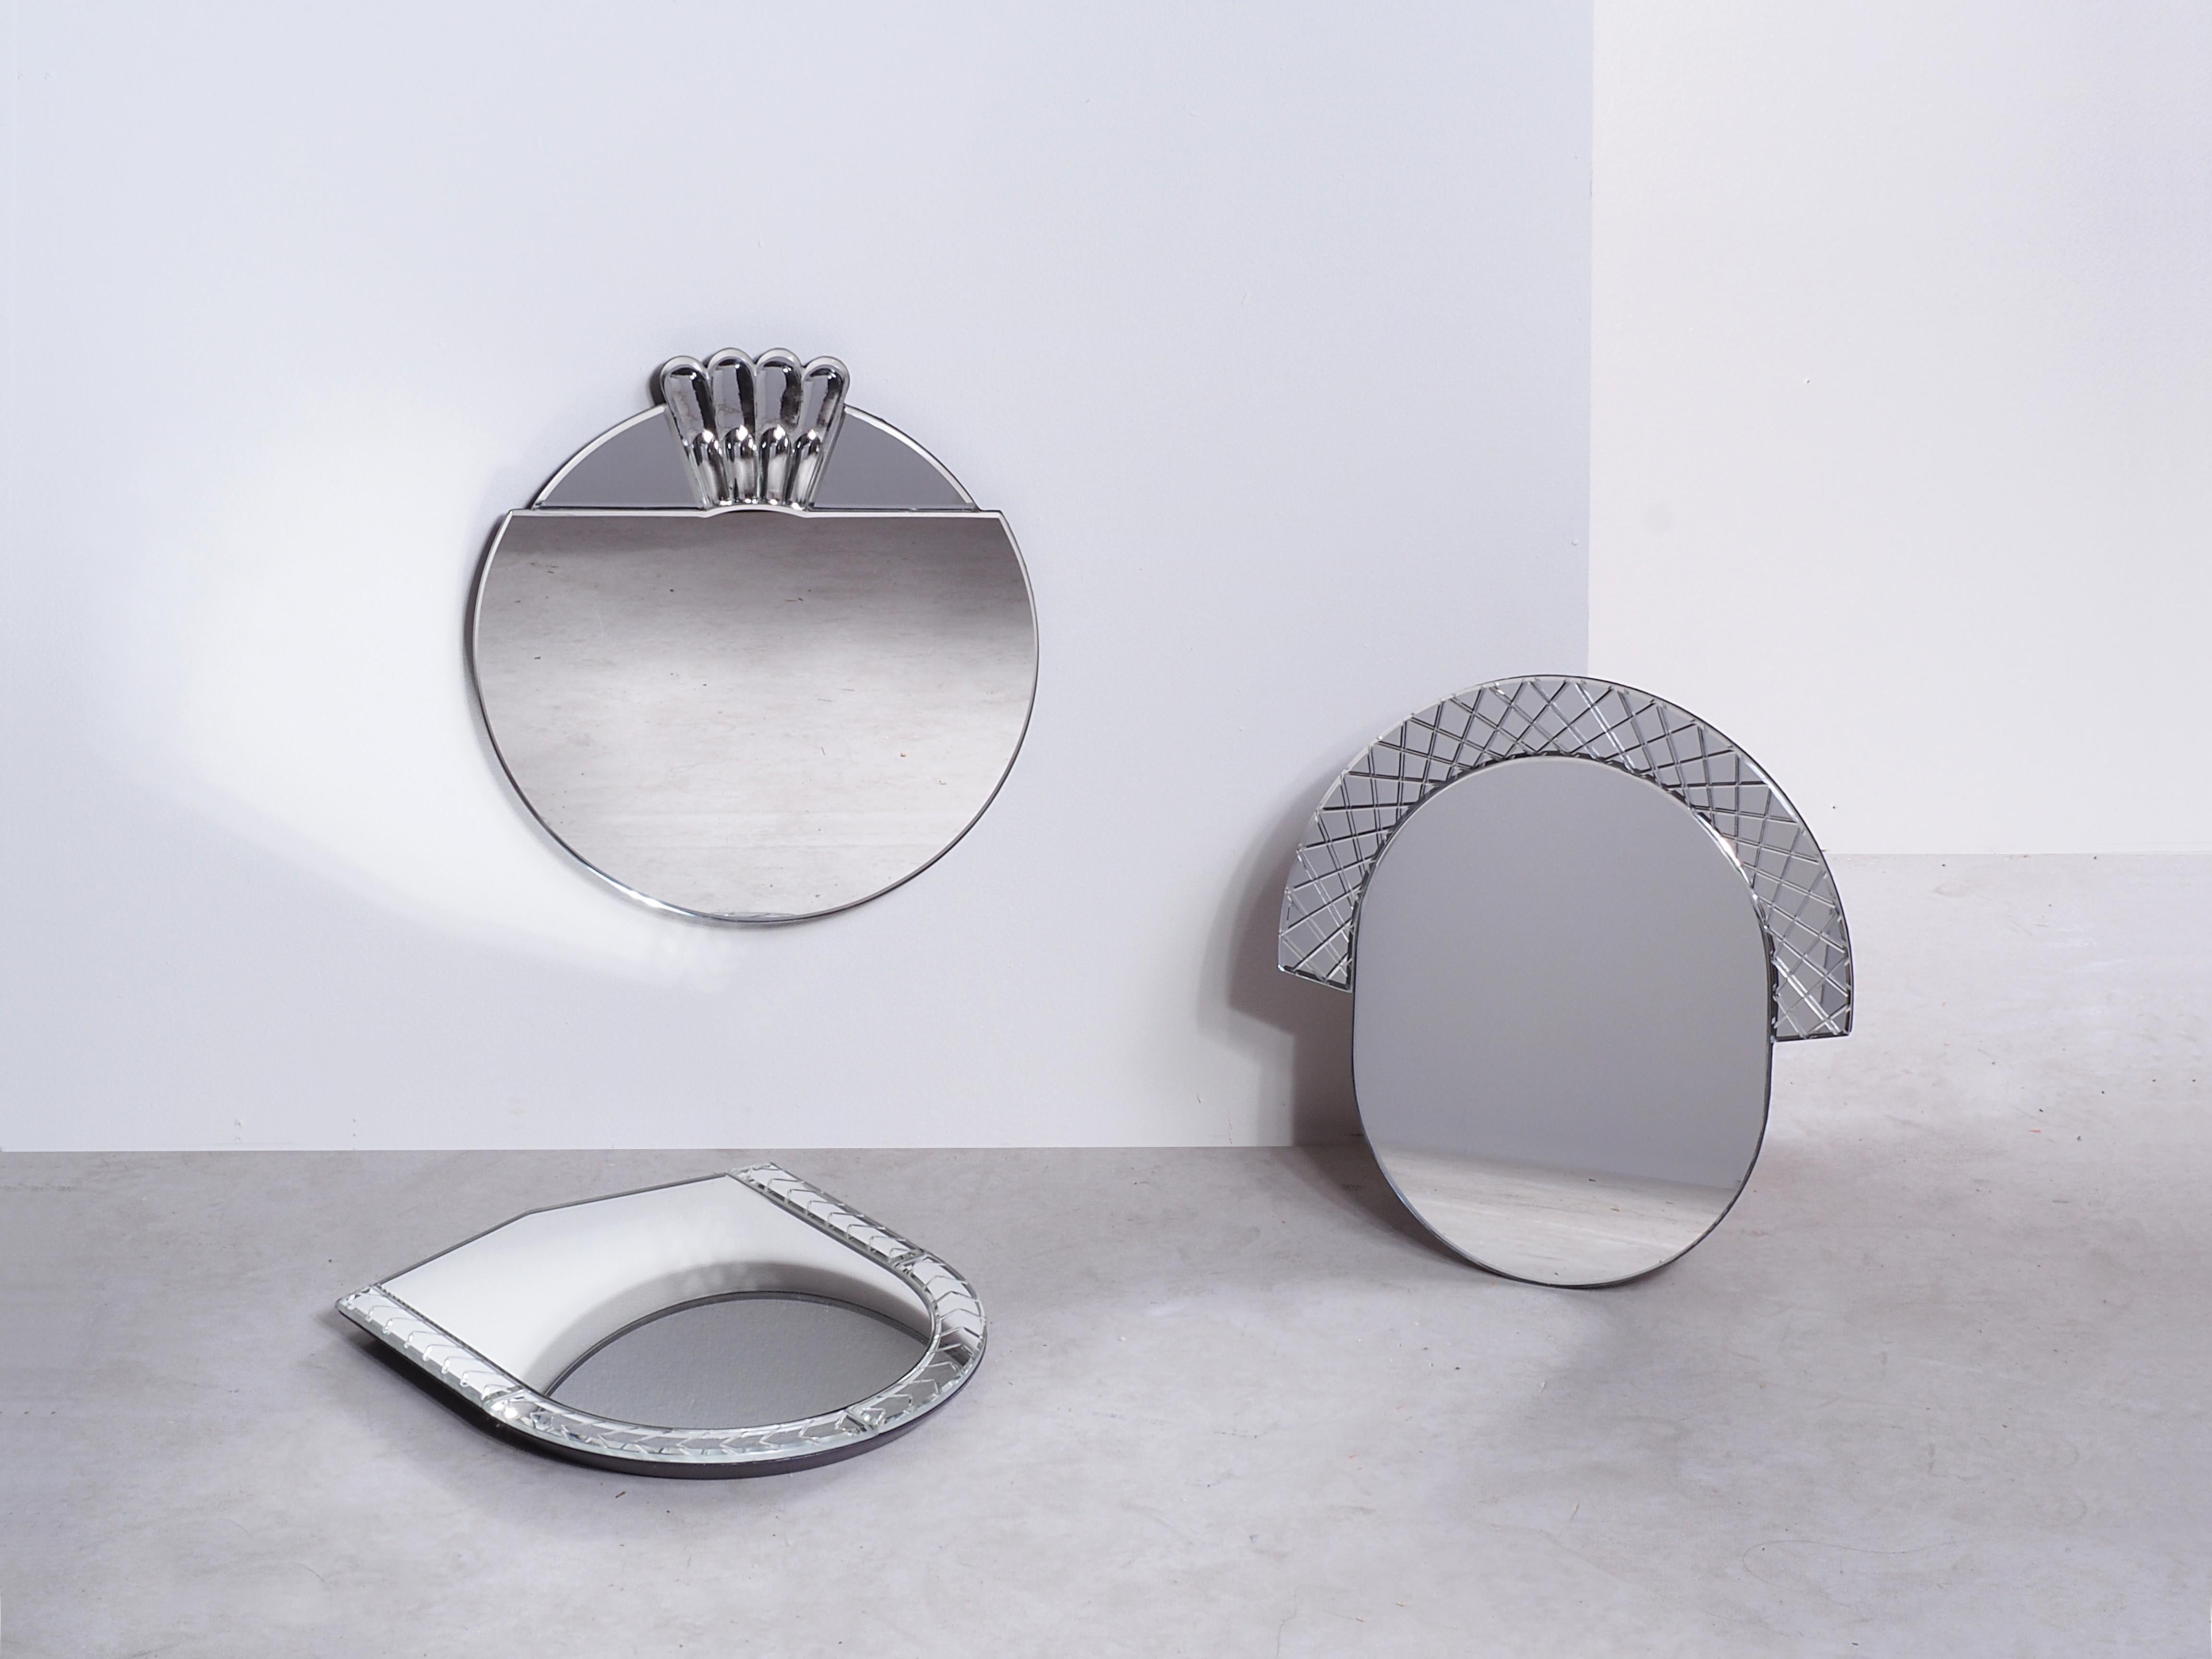 Set of 3 large scena elemento murano mirrors by Nikolai Kotlarczyk
Dimensions: D 3 x W 65 x H 60 cm (each). 
Materials: silvered carved glass, dark gray wood back.
Also available in other designs and dimensions.


Elemento is a series of solid